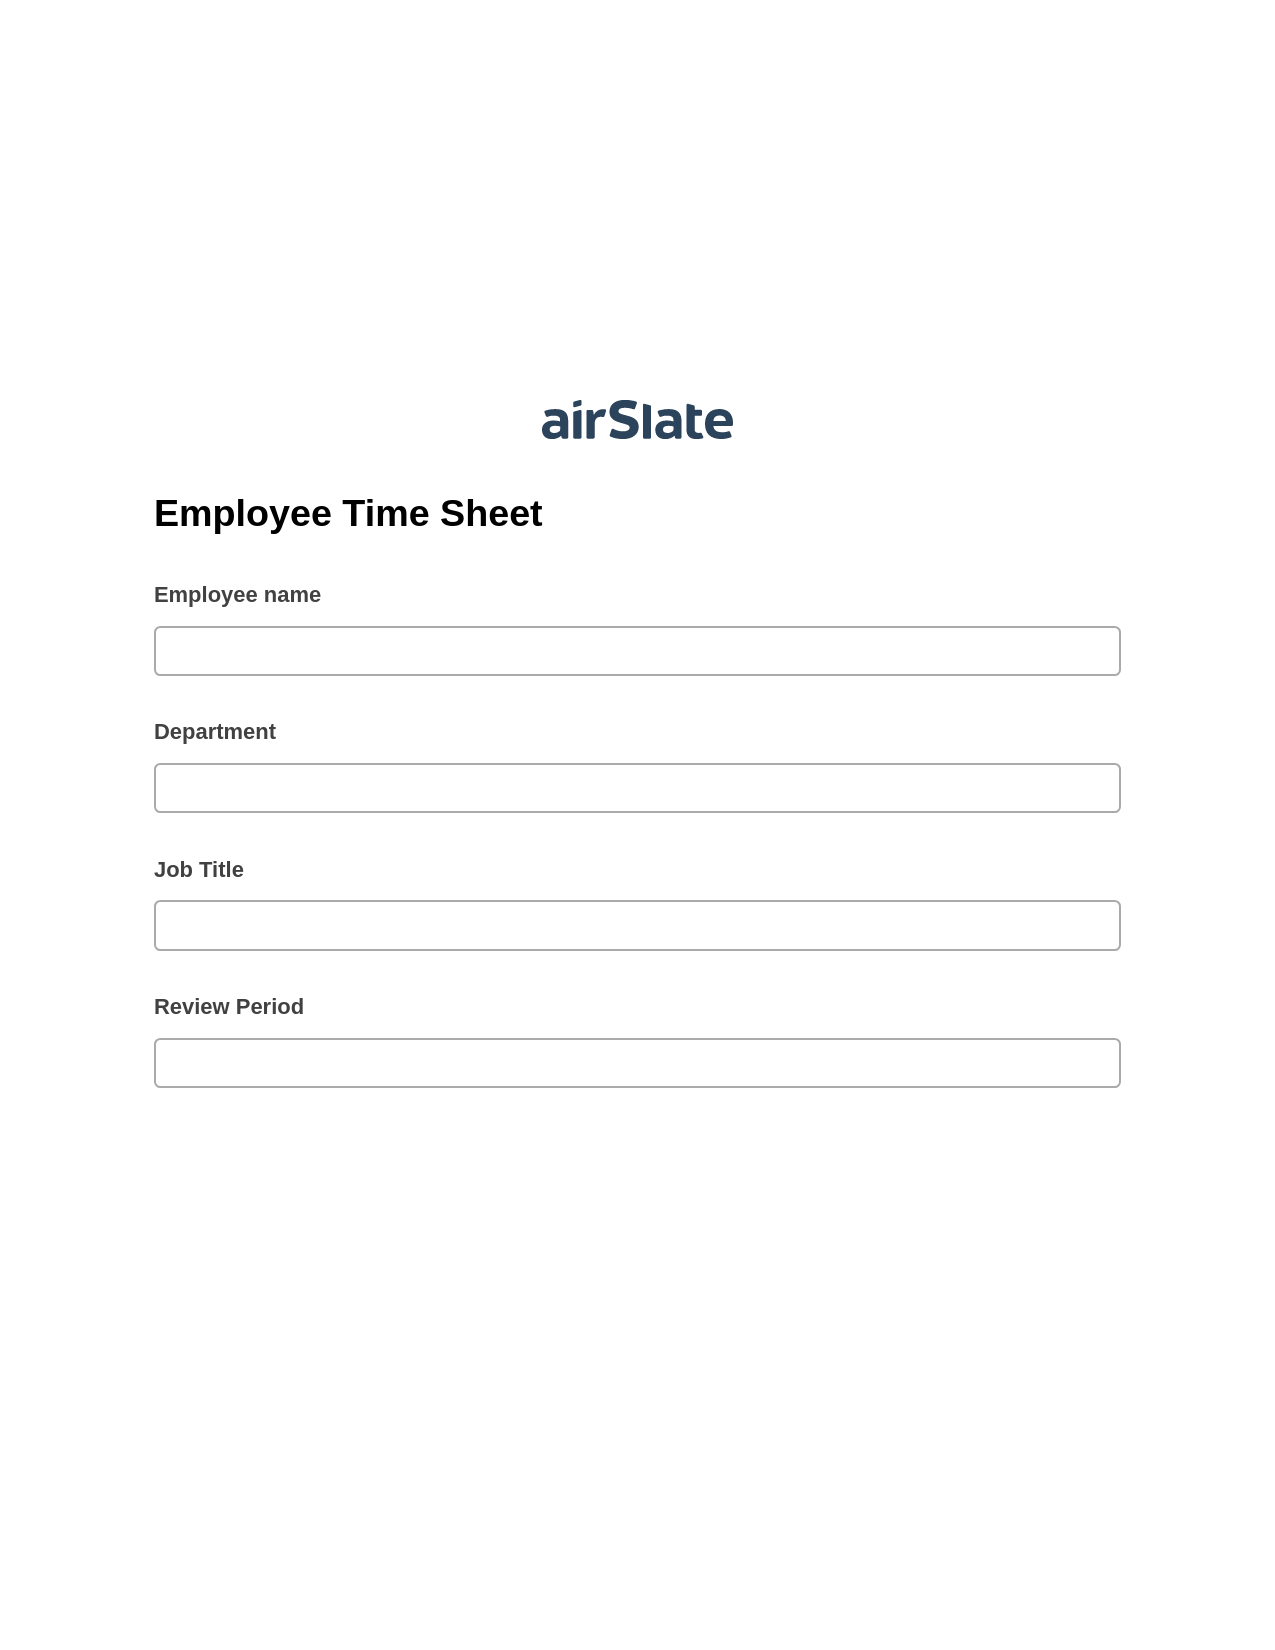 Multirole Employee Time Sheet Pre-fill from another Slate Bot, Assign Roles to Recipients Bot, Export to Excel 365 Bot